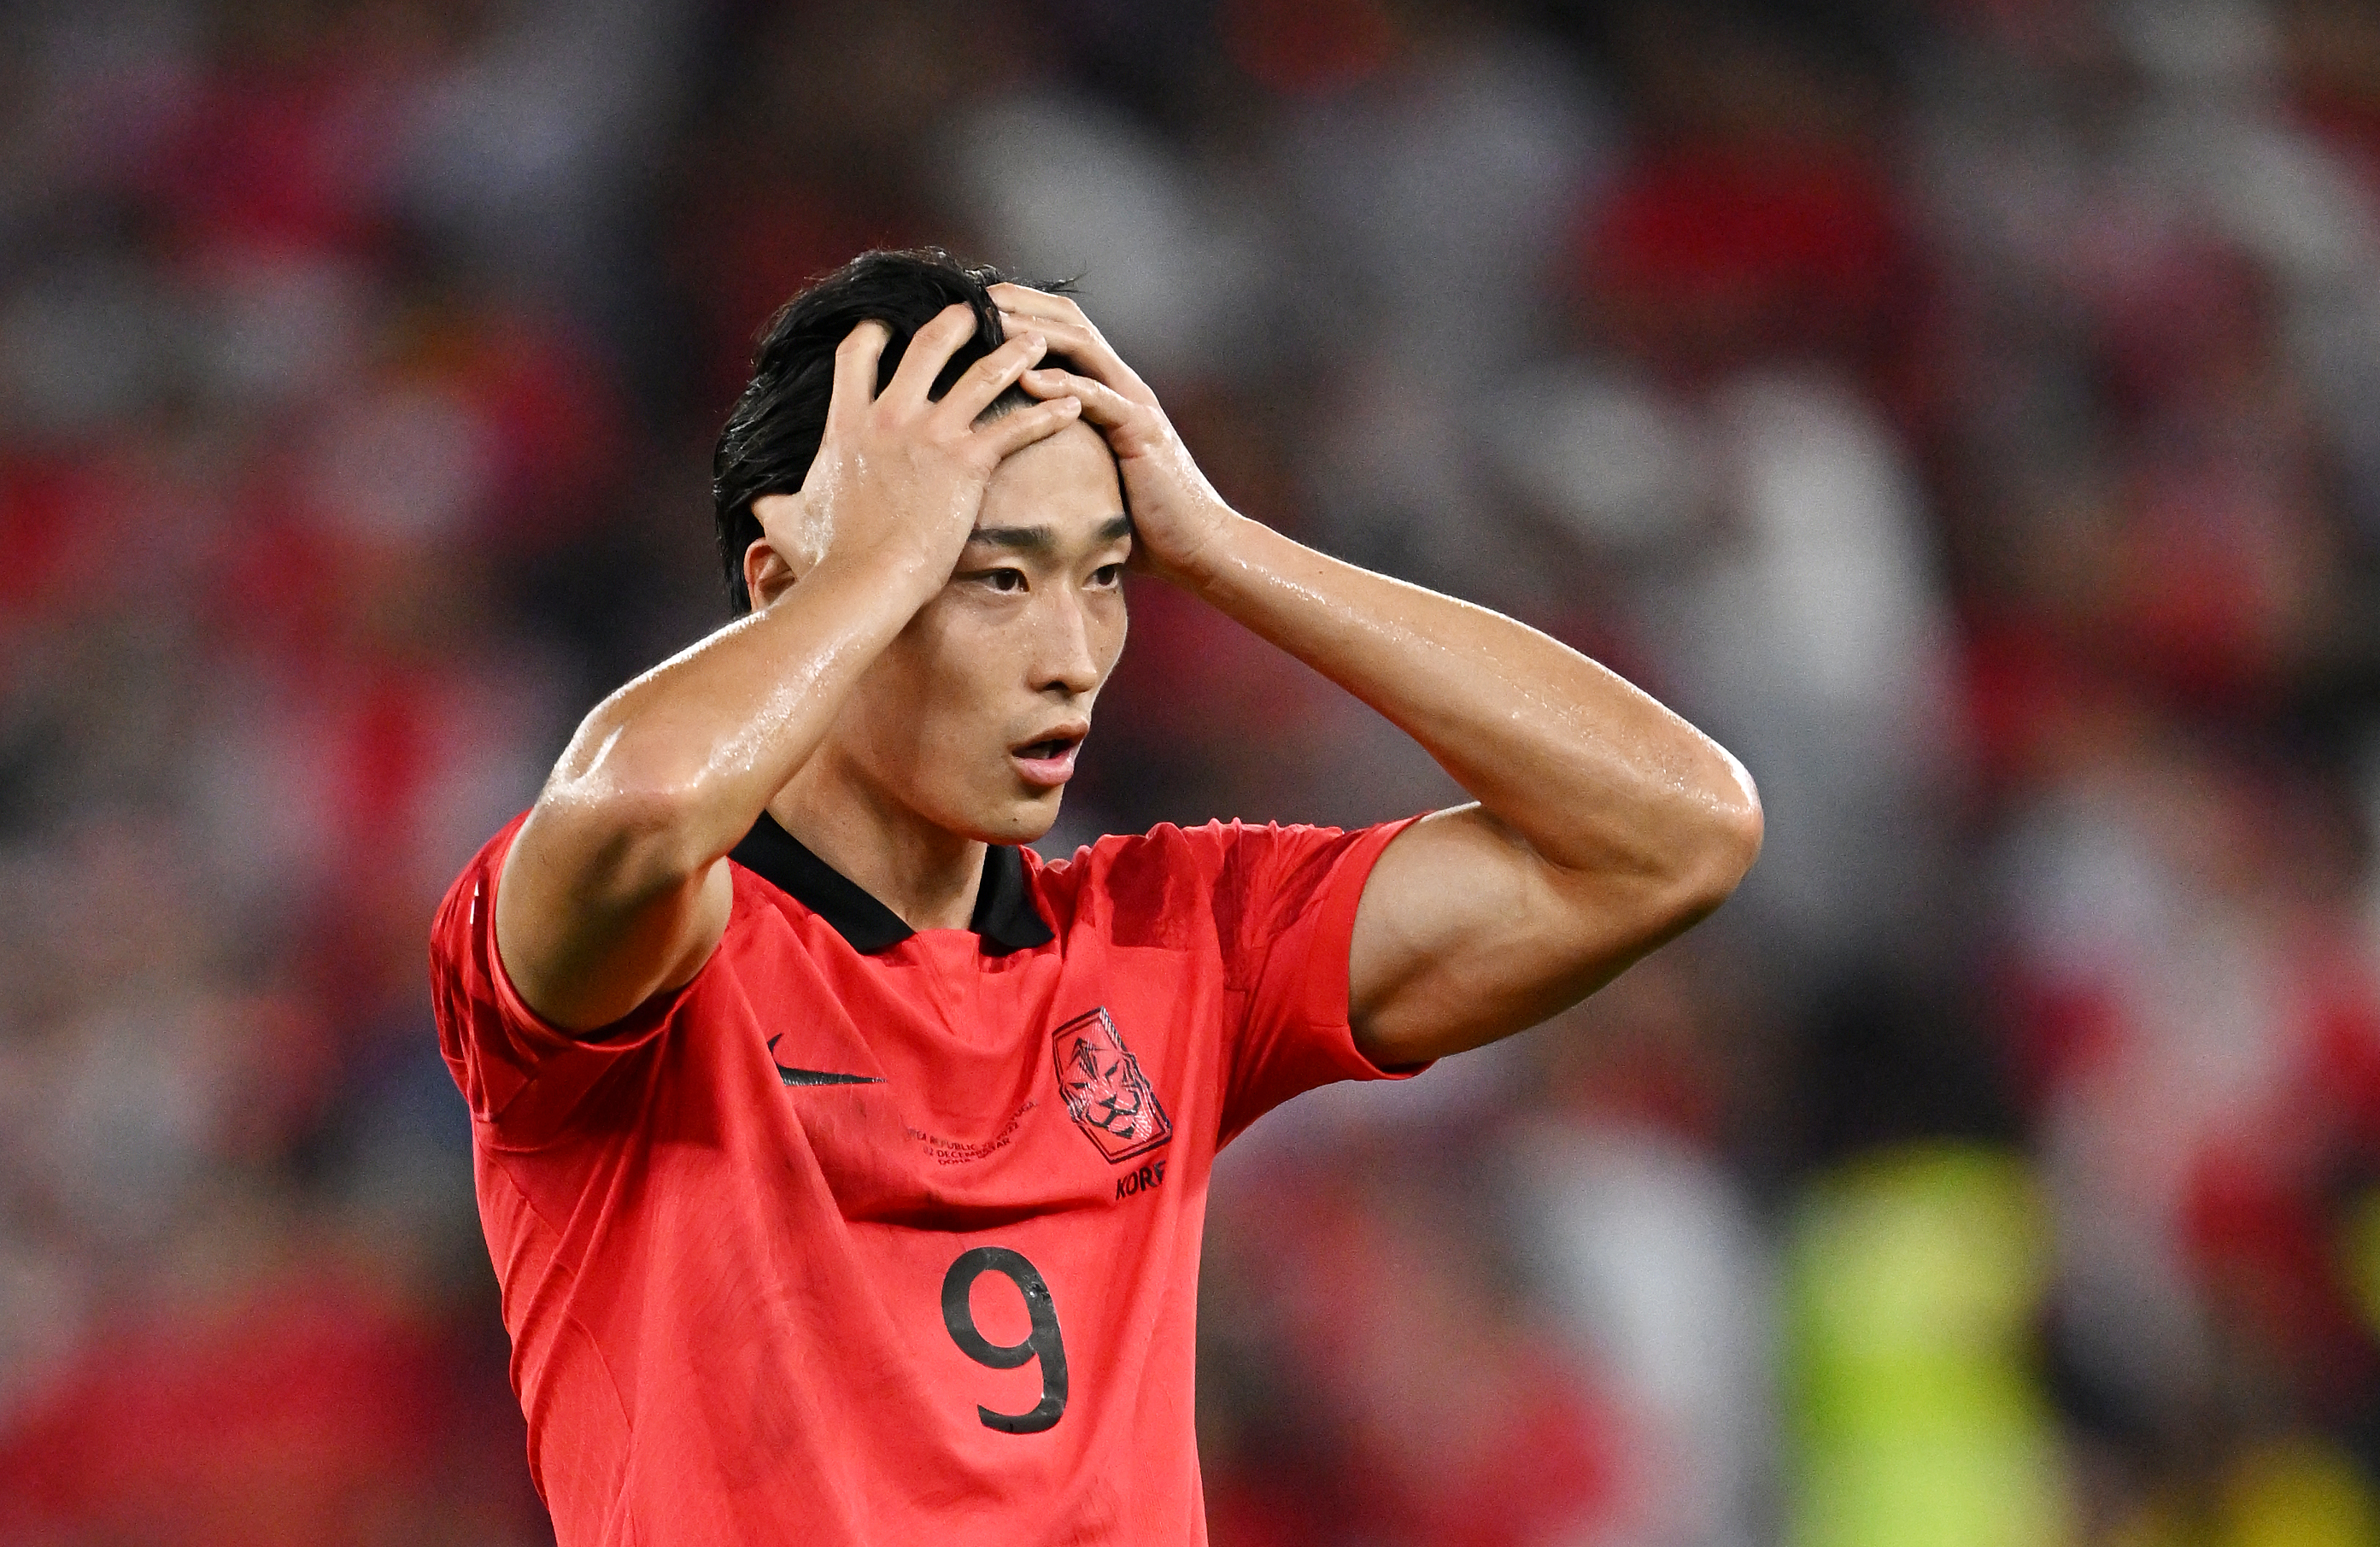 Fans impressed by this players look and performance despite losing game in  the FIFA World Cup